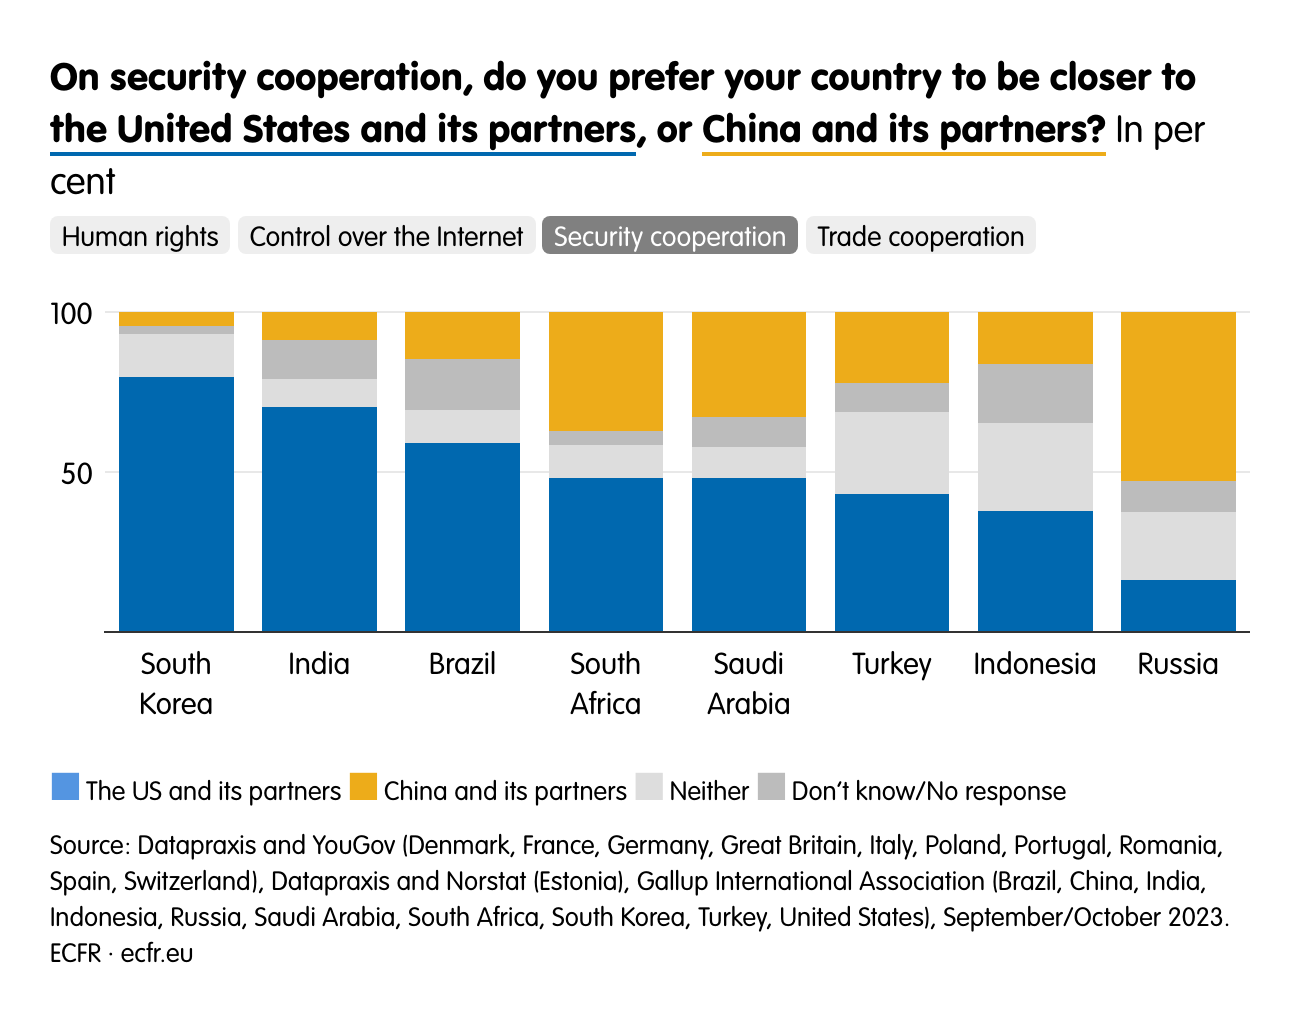 On security cooperation, do you prefer your country to be closer to  the United States and its partners, or China and its partners?
